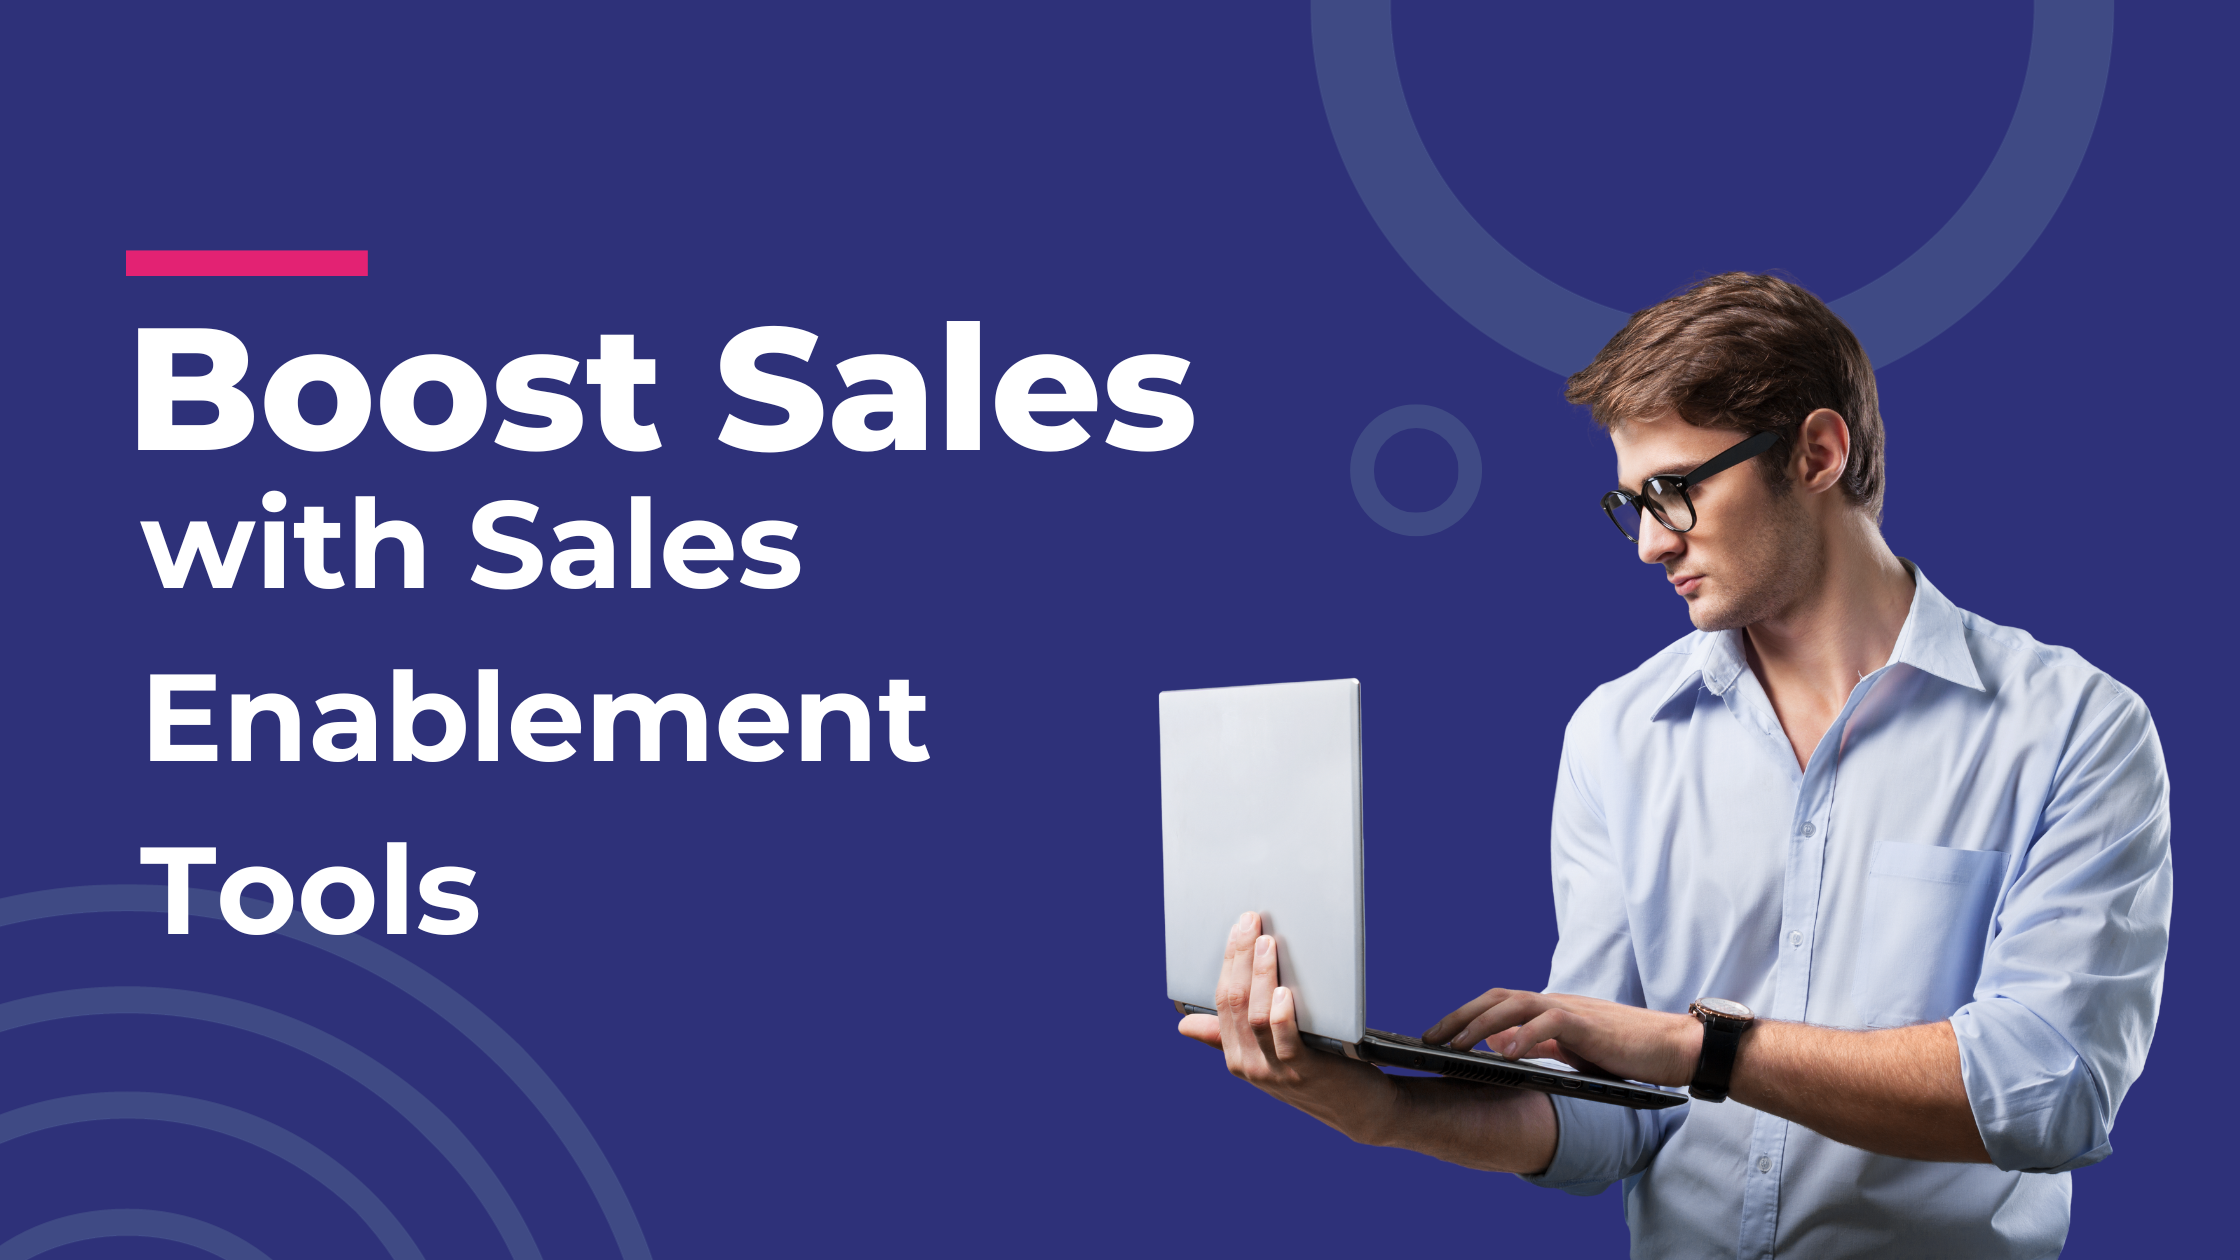 Boost Sales with Sales Enablement Tools